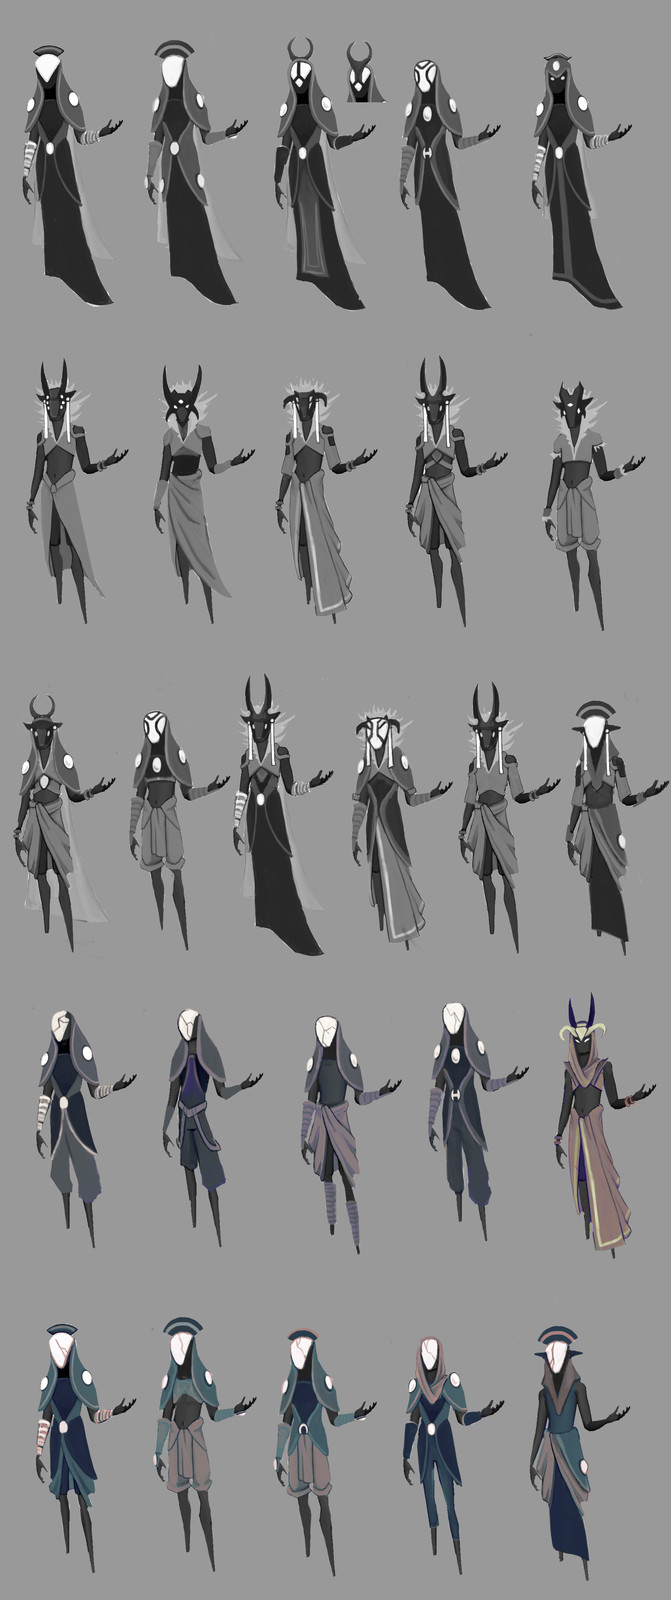 More arcanist thumbnails.